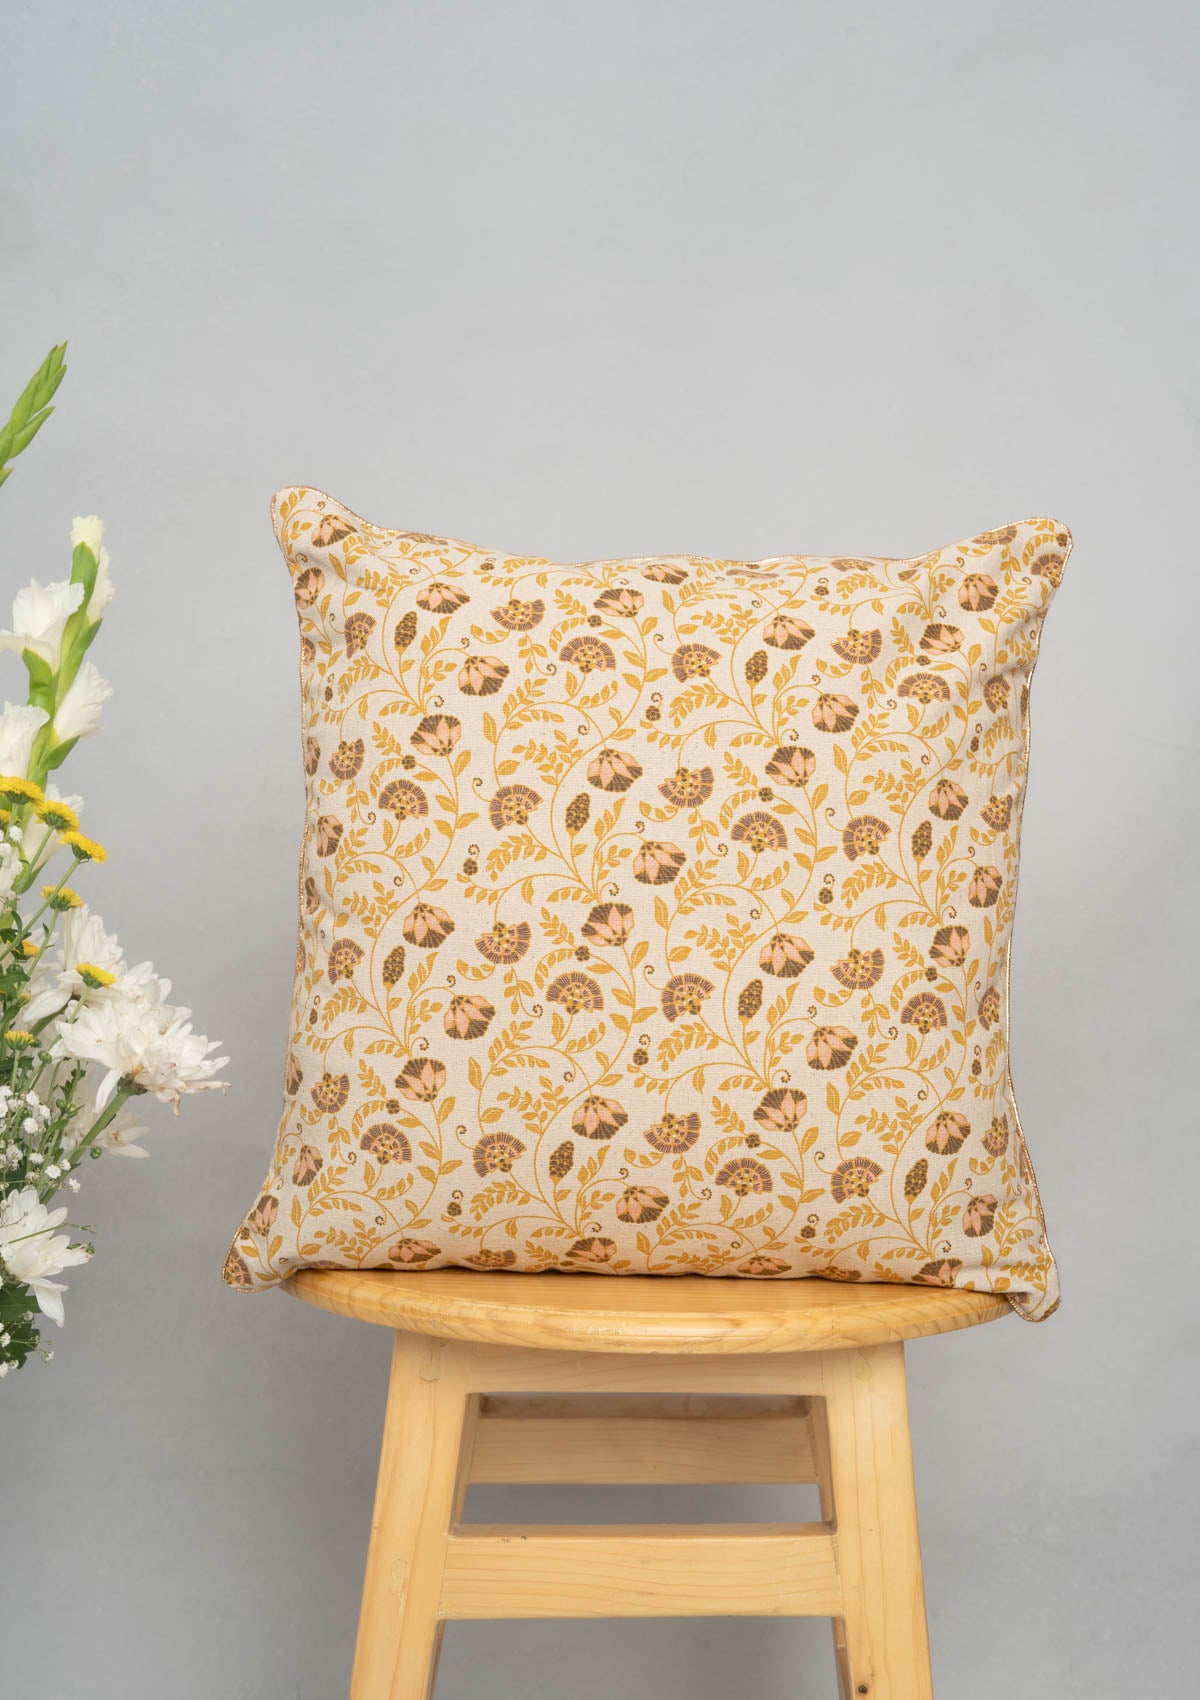 Calico Printed 100% cotton floral cushion cover for sofa with gold piping - Multicolor